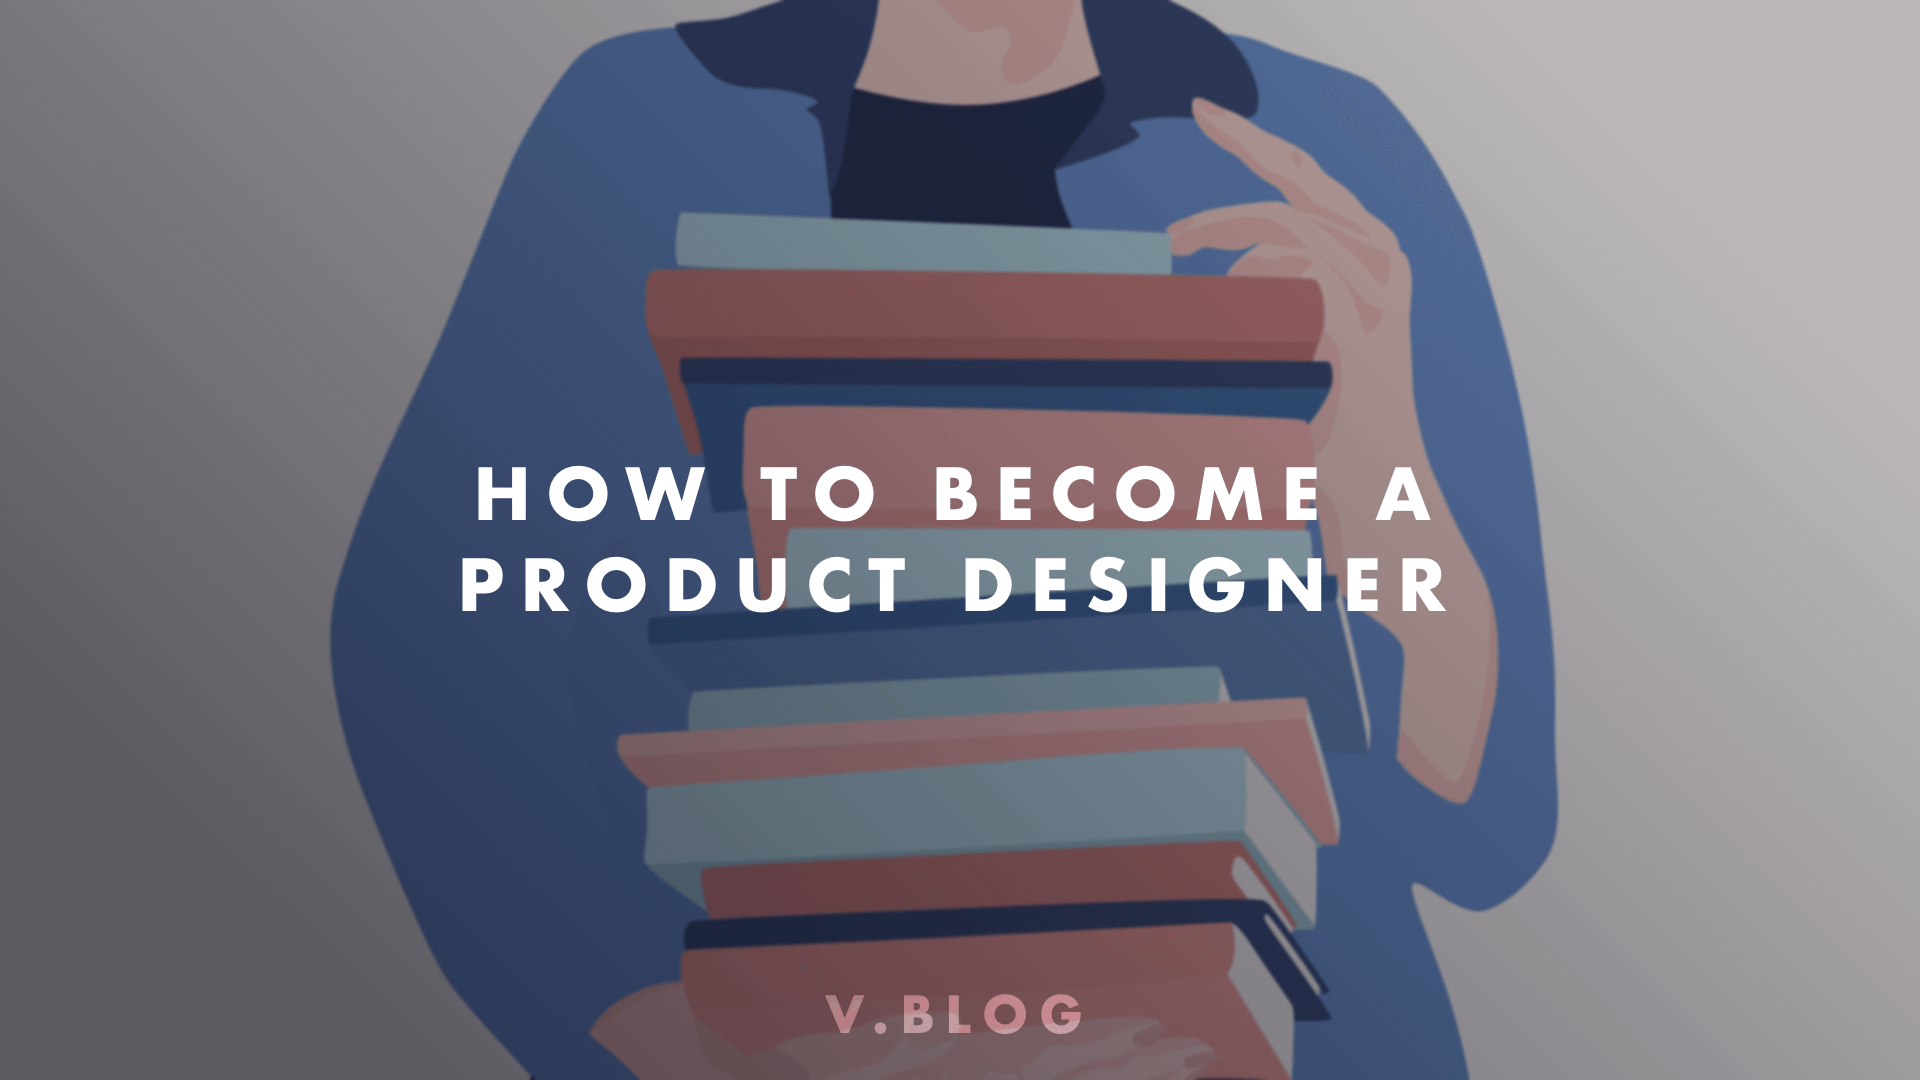 How To Become A Product Designer image